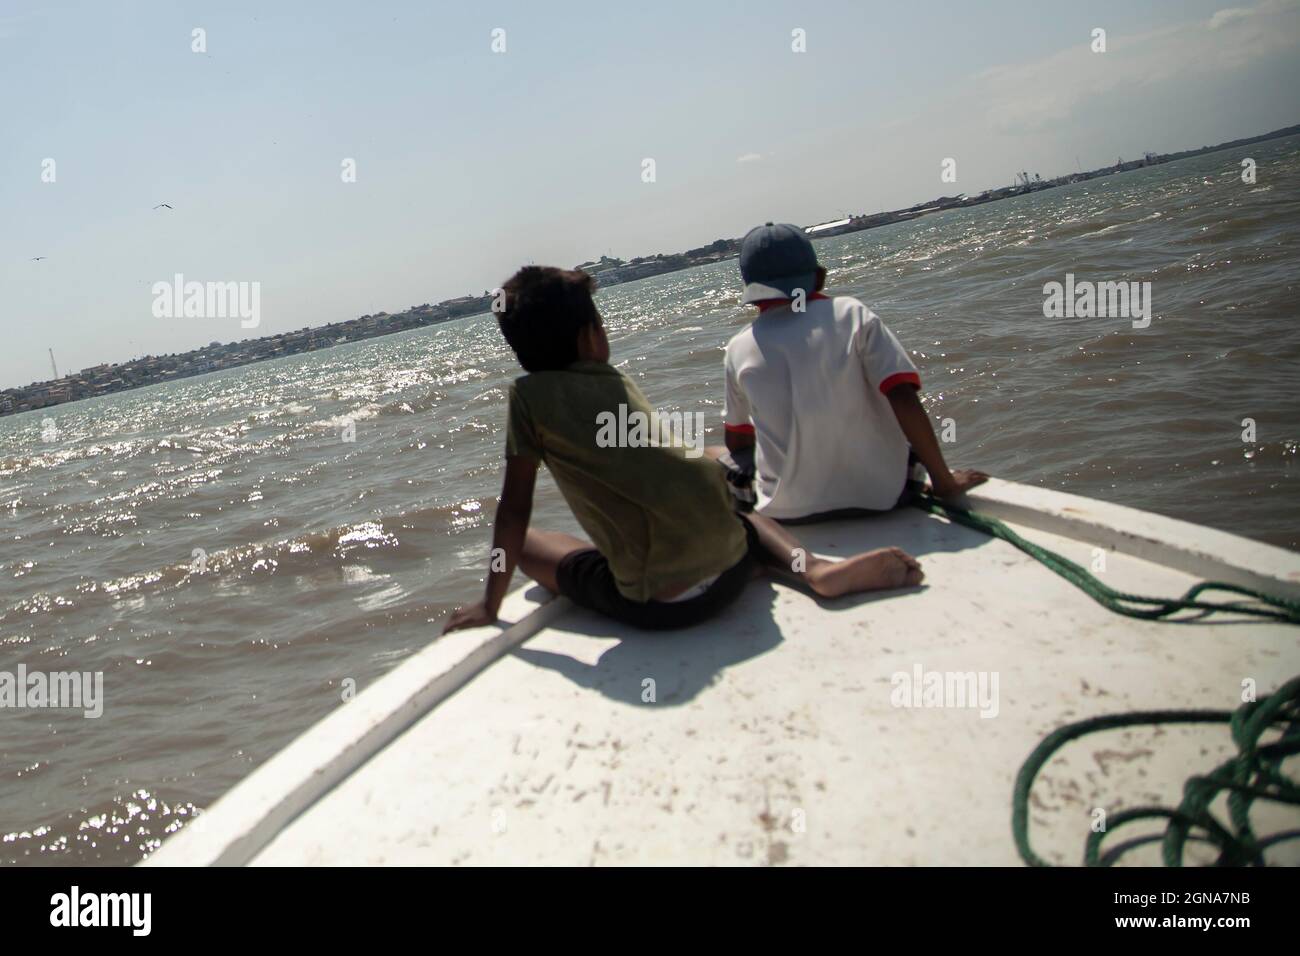 two poor children riding the front of a fishing boat third world country poverty Stock Photo